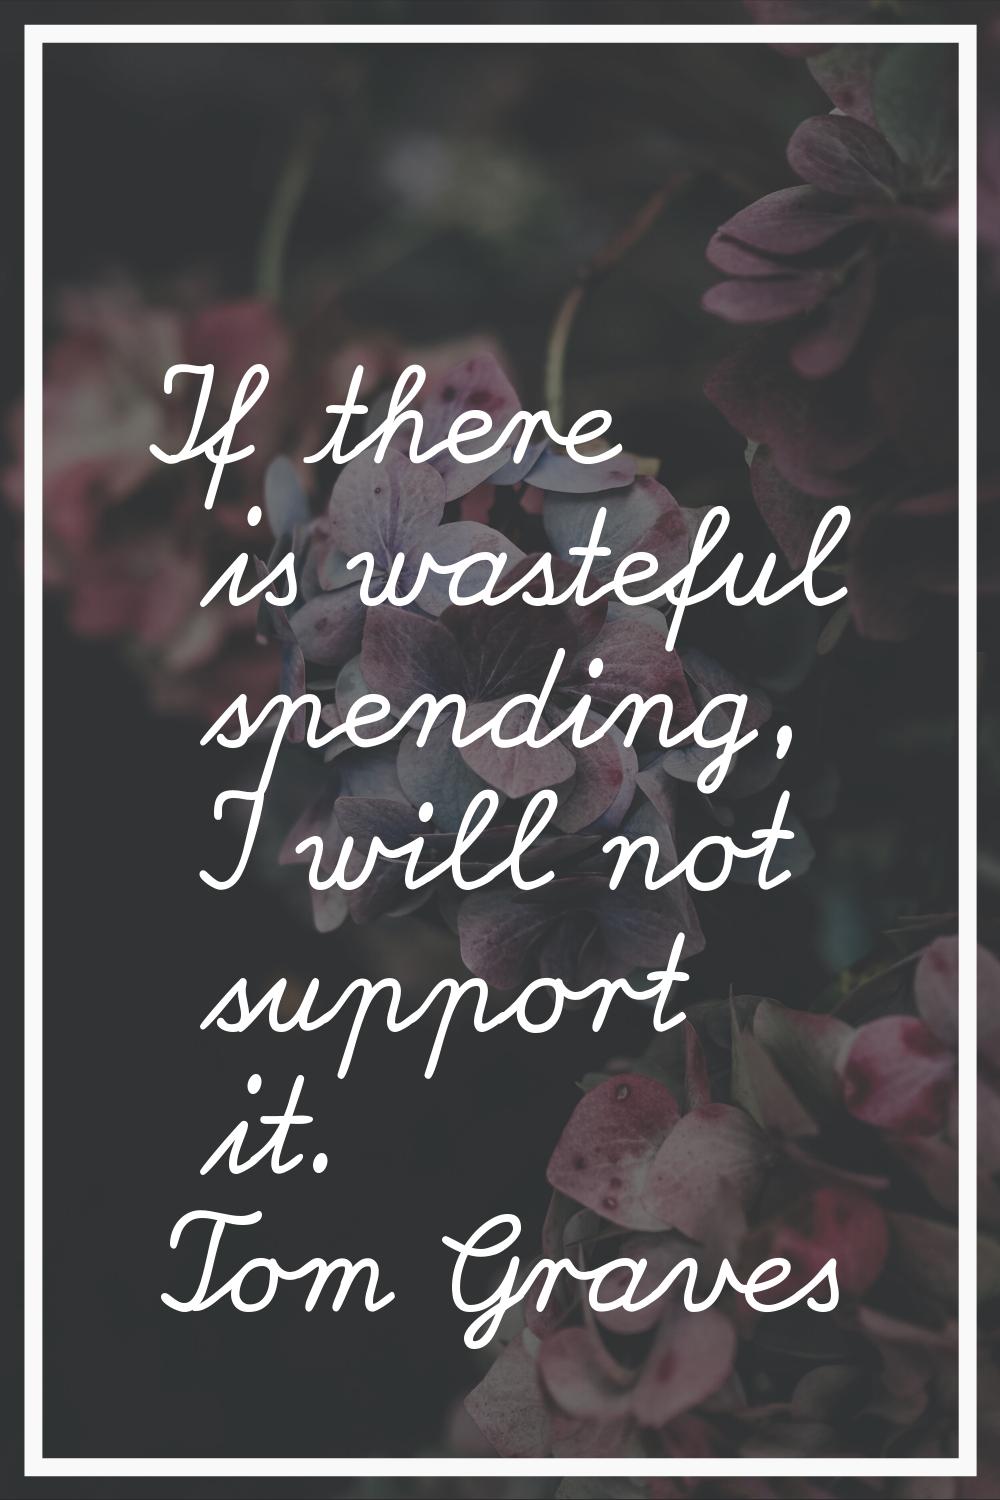 If there is wasteful spending, I will not support it.